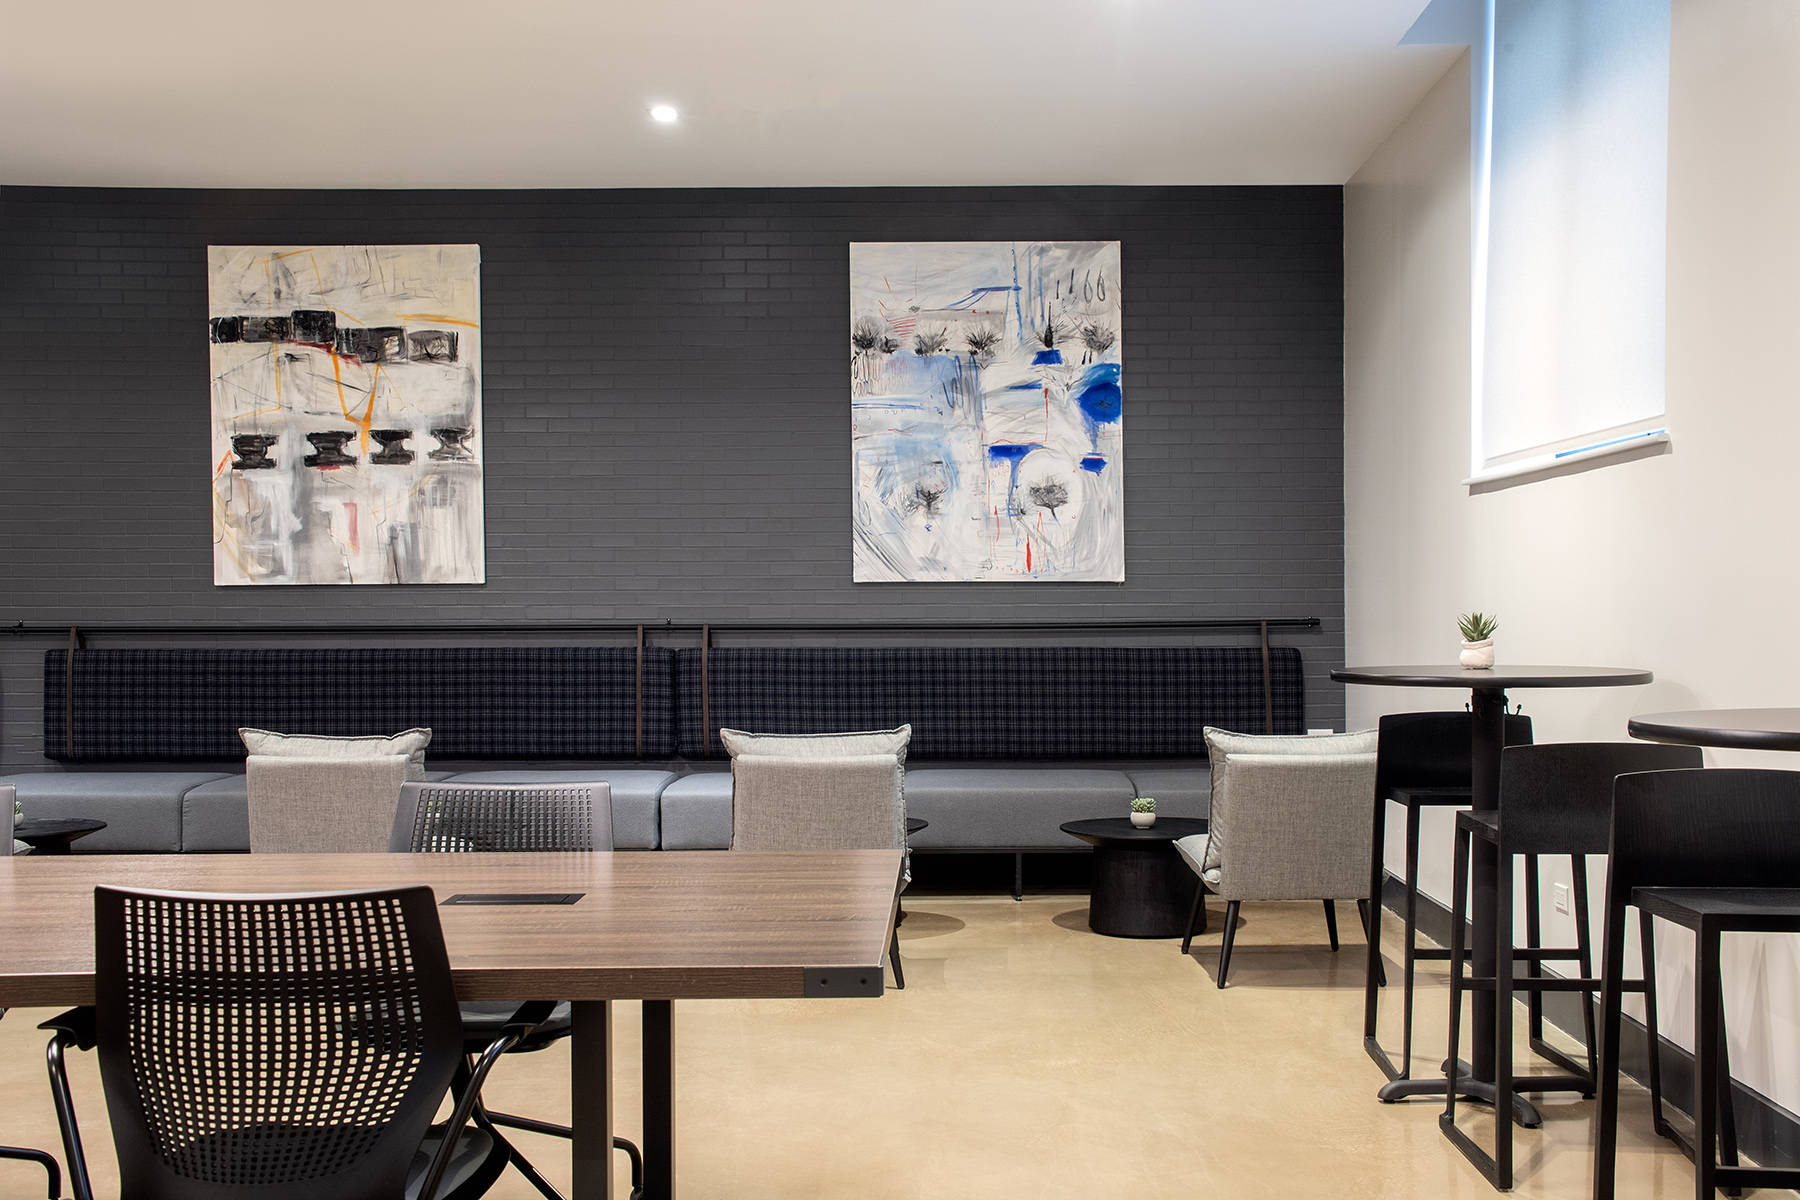 Detail shot of coworking space with large modern artwork on walls and seating throughout